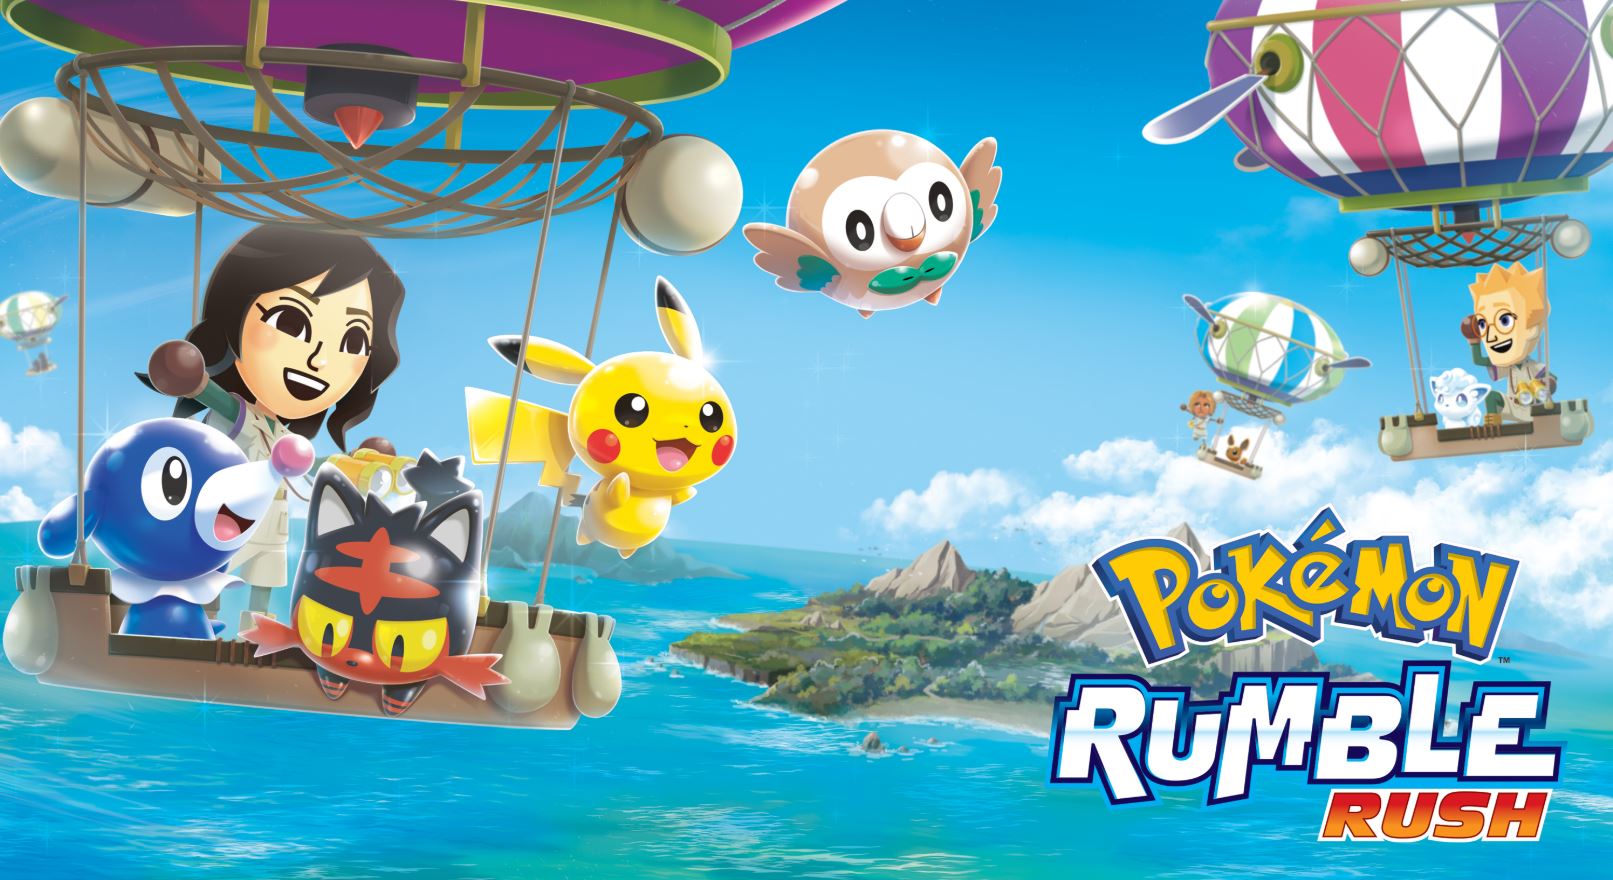 Pokémon Rumble Rush Guide: Tips, Cheats and Strategies